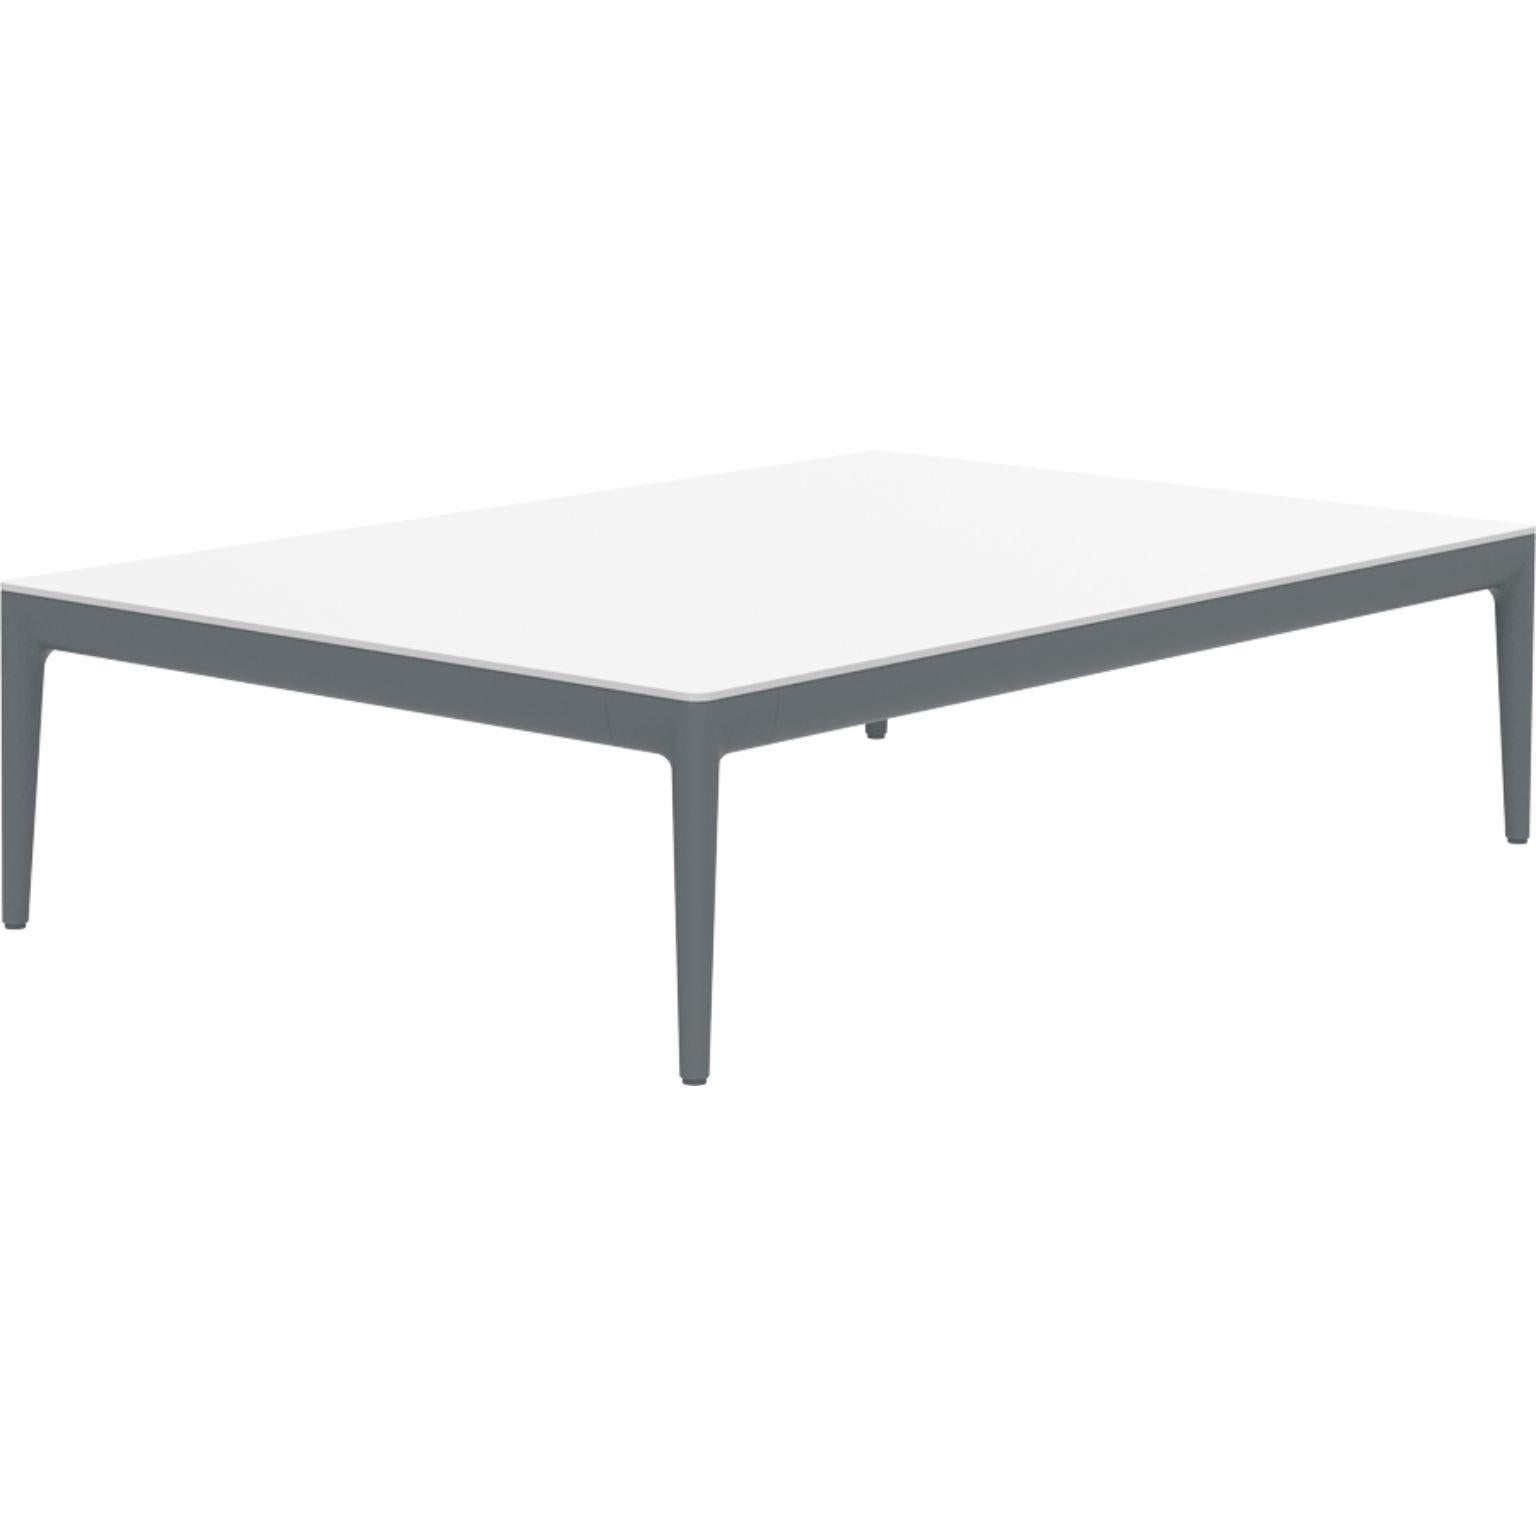 Ribbons grey 115 coffee table by MOWEE
Dimensions: D 76 x W 115 x H 29 cm
Material: Aluminum and HPL top.
Weight: 14.5 kg.
Also available in different colors and finishes. (HPL Black Edge or Neolith top).

An unmistakable collection for its